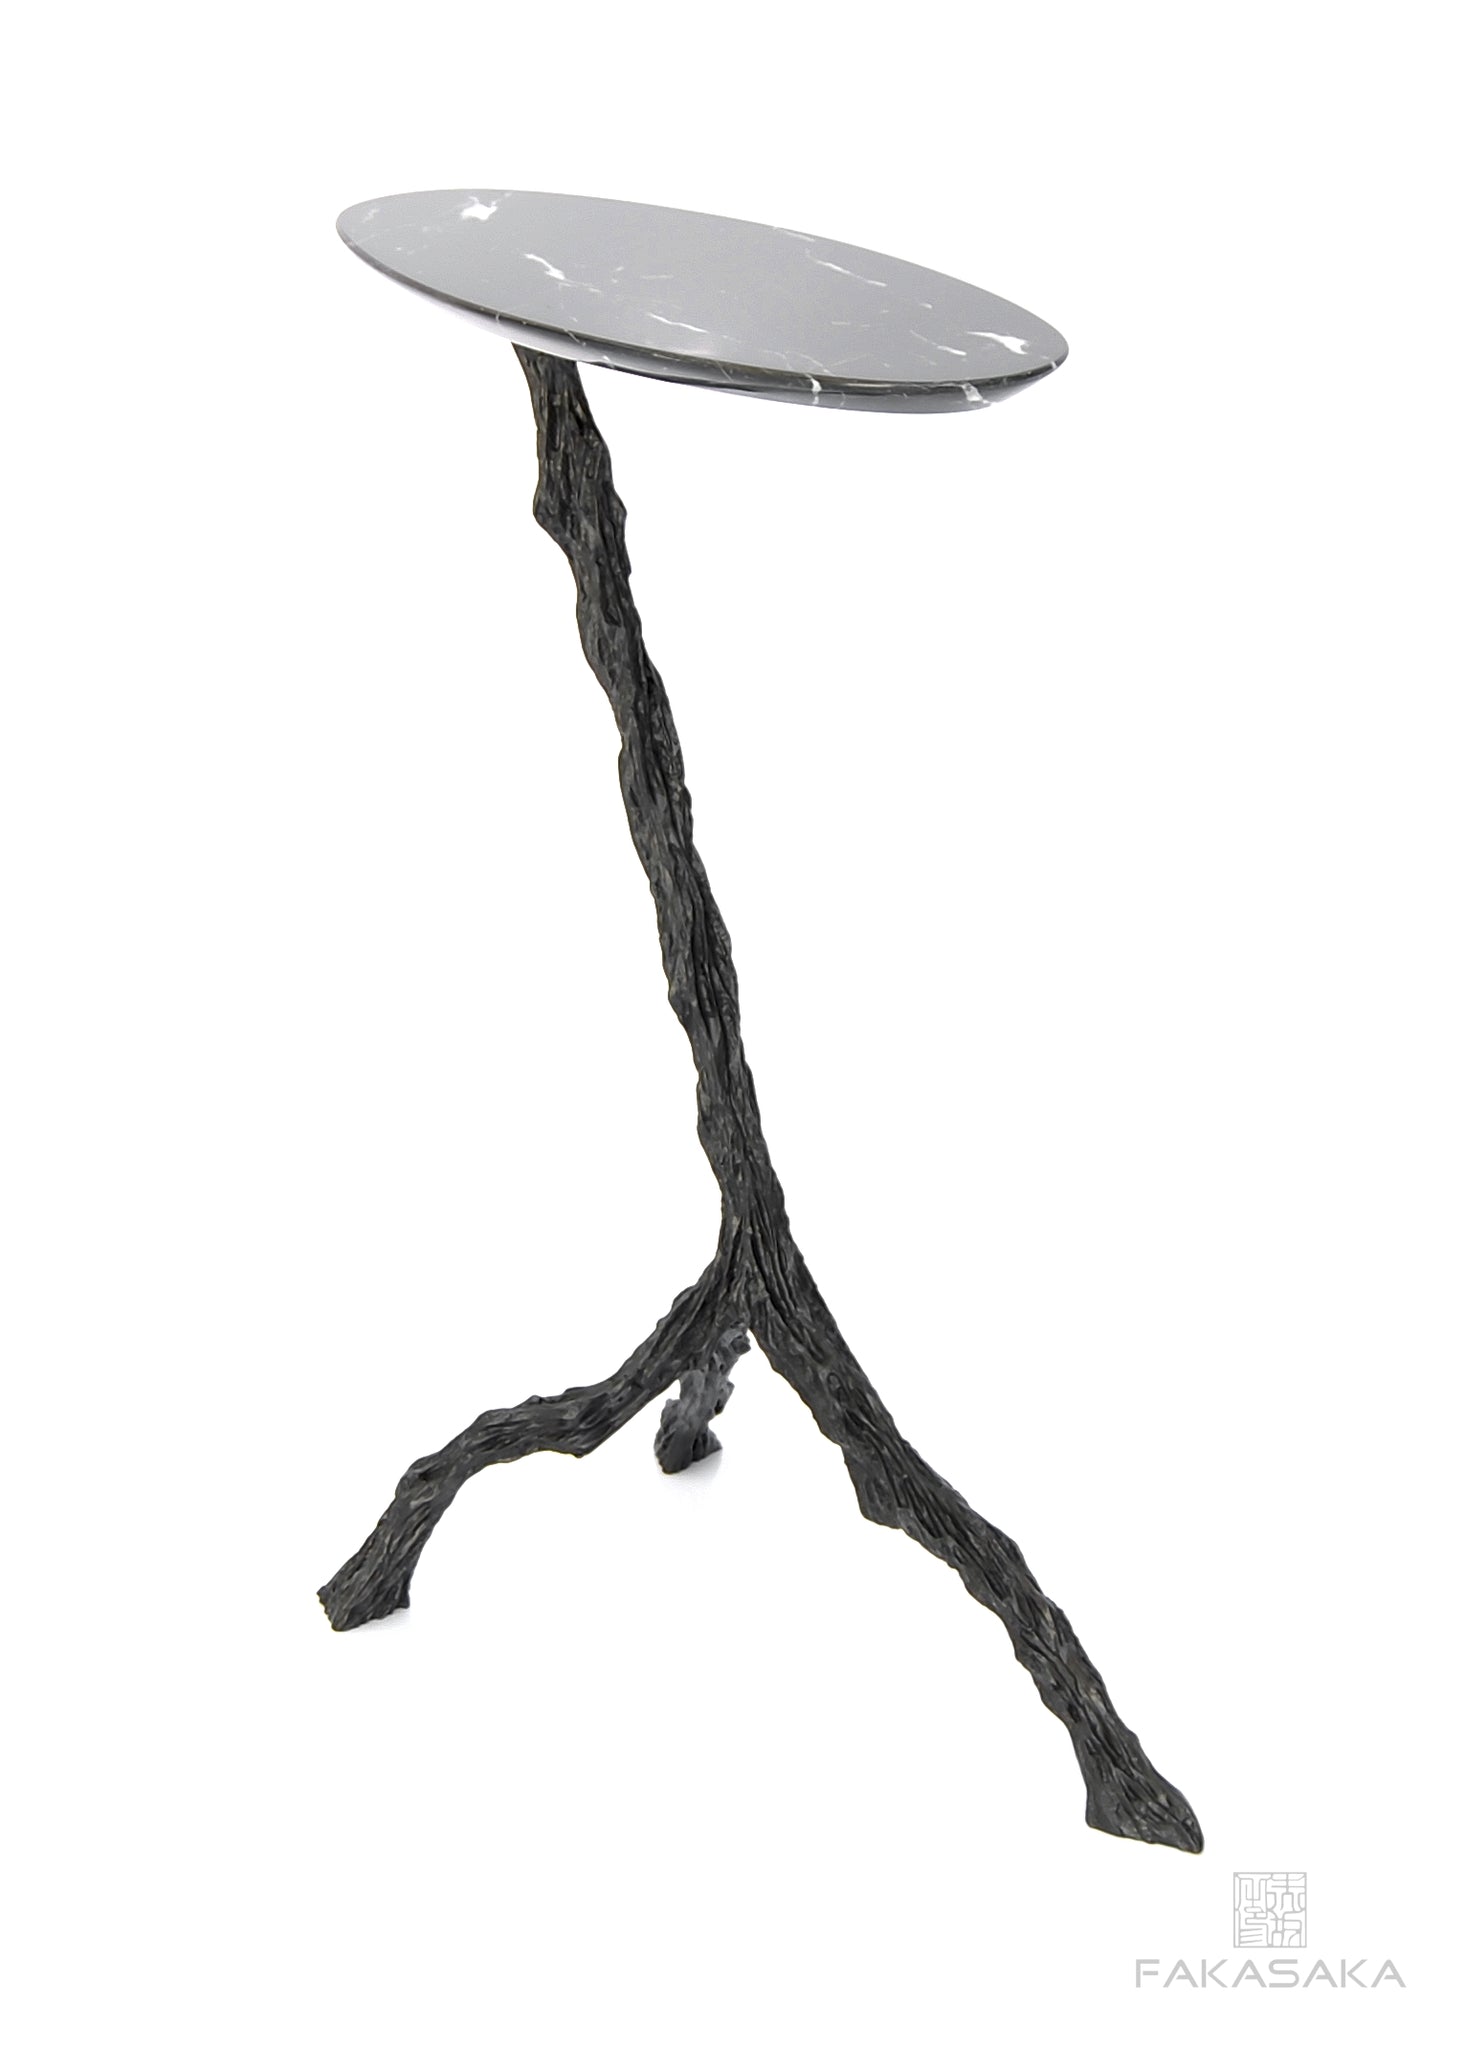 PANCHO DRINK TABLE<br><br>NERO MARQUINA MARBLE<br>DARK BRONZE